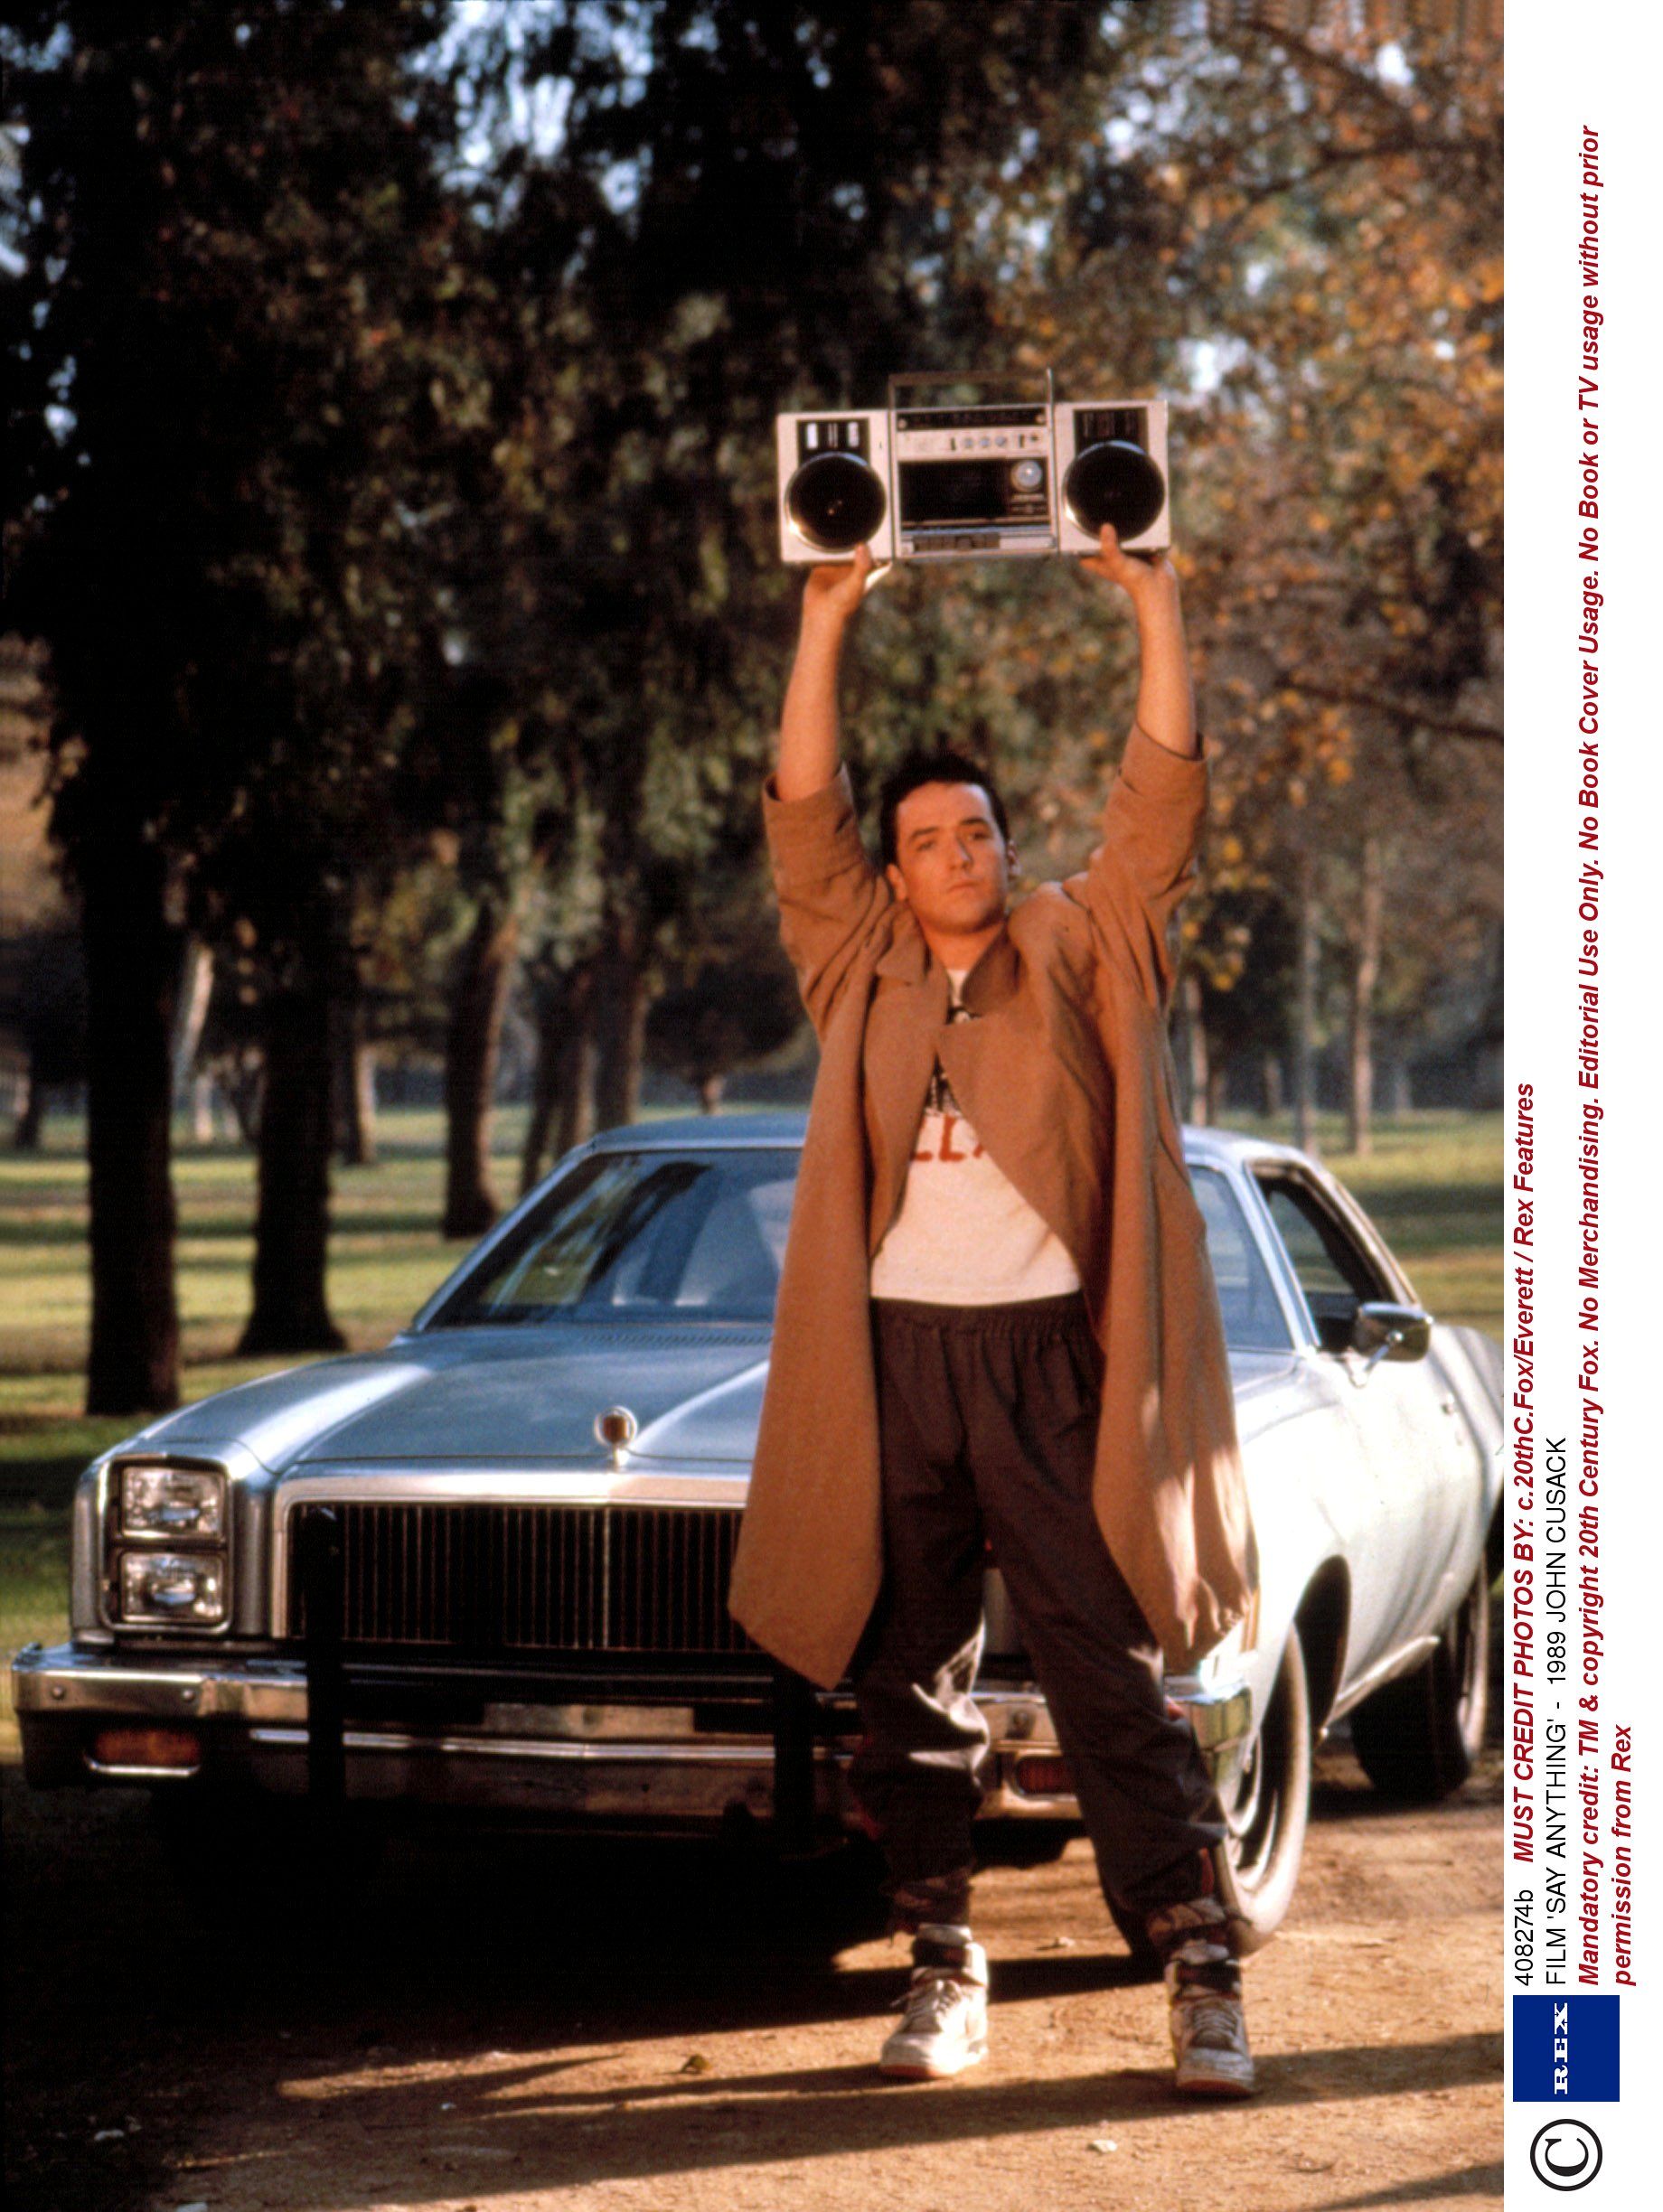 the song from say anything boombox scene